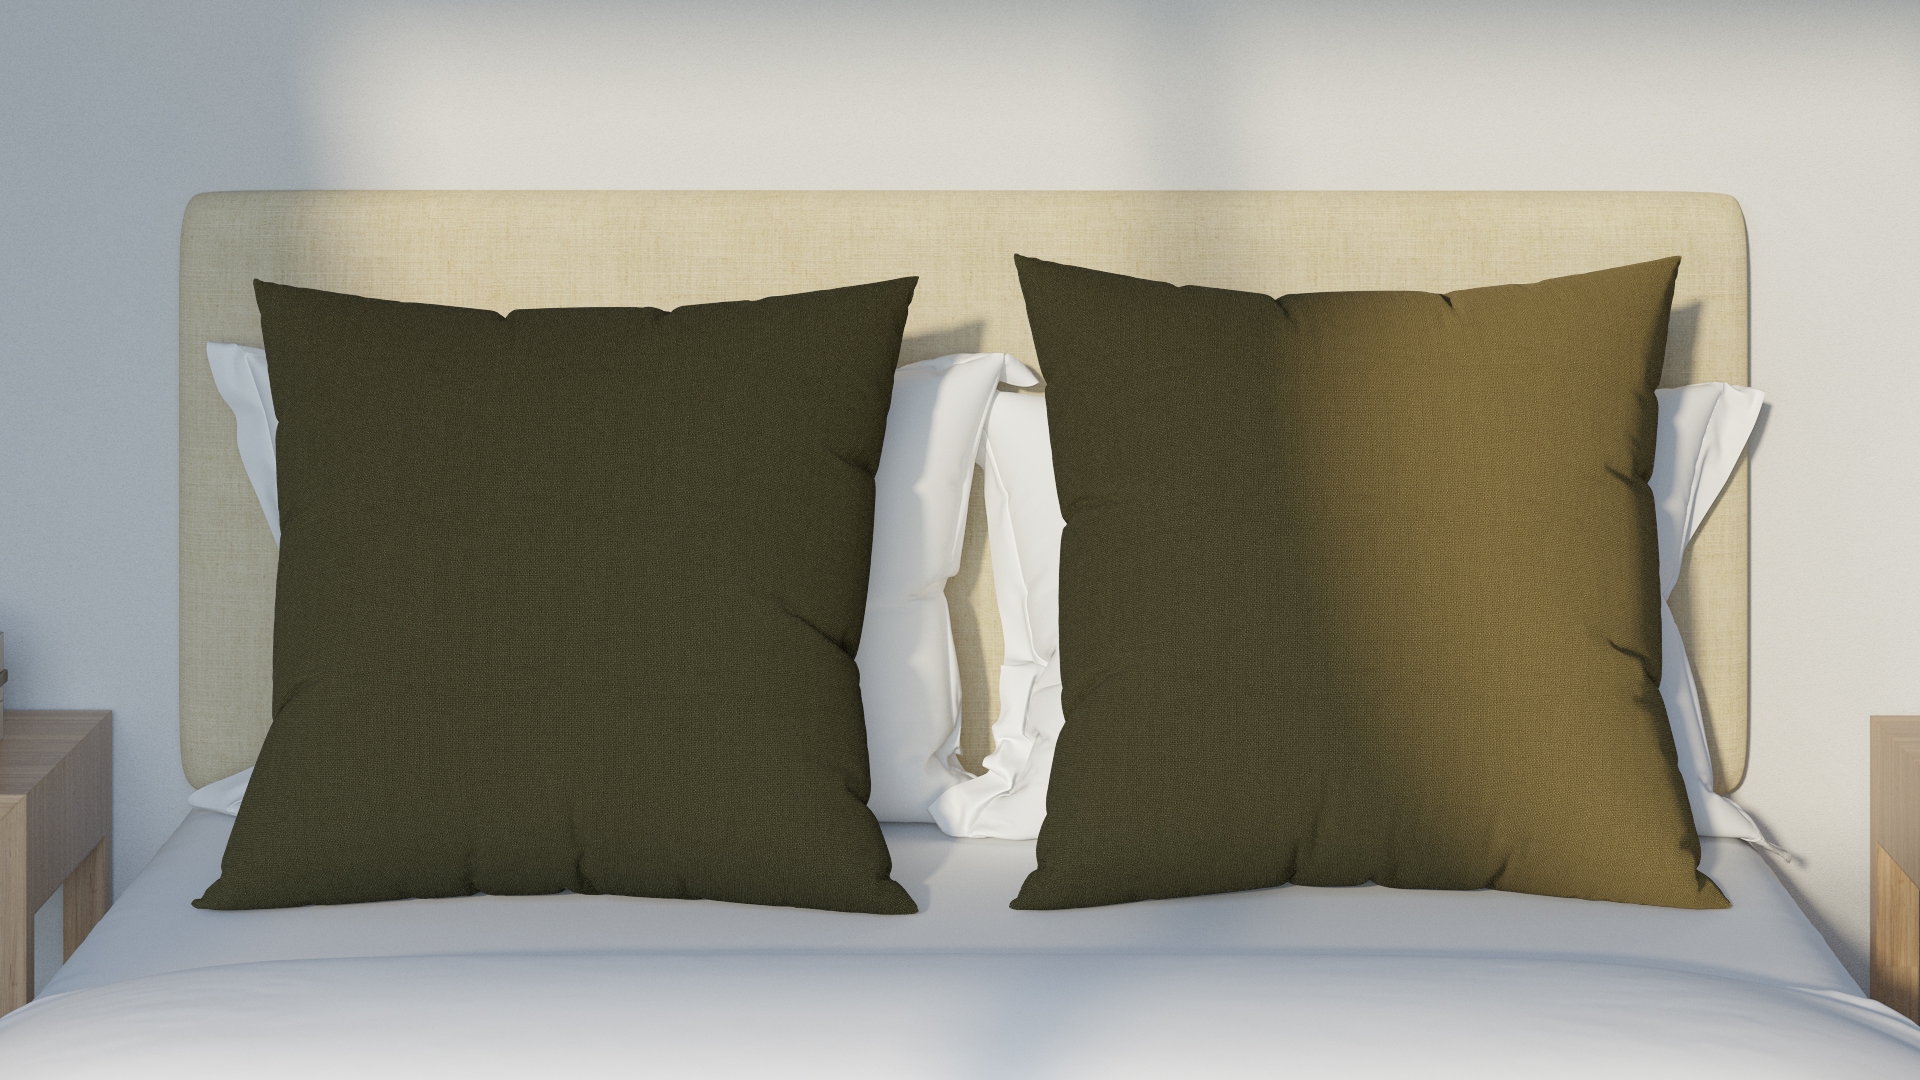 Throw Pillow 26", Olive Everyday Linen, 26" x 26" - Image 2